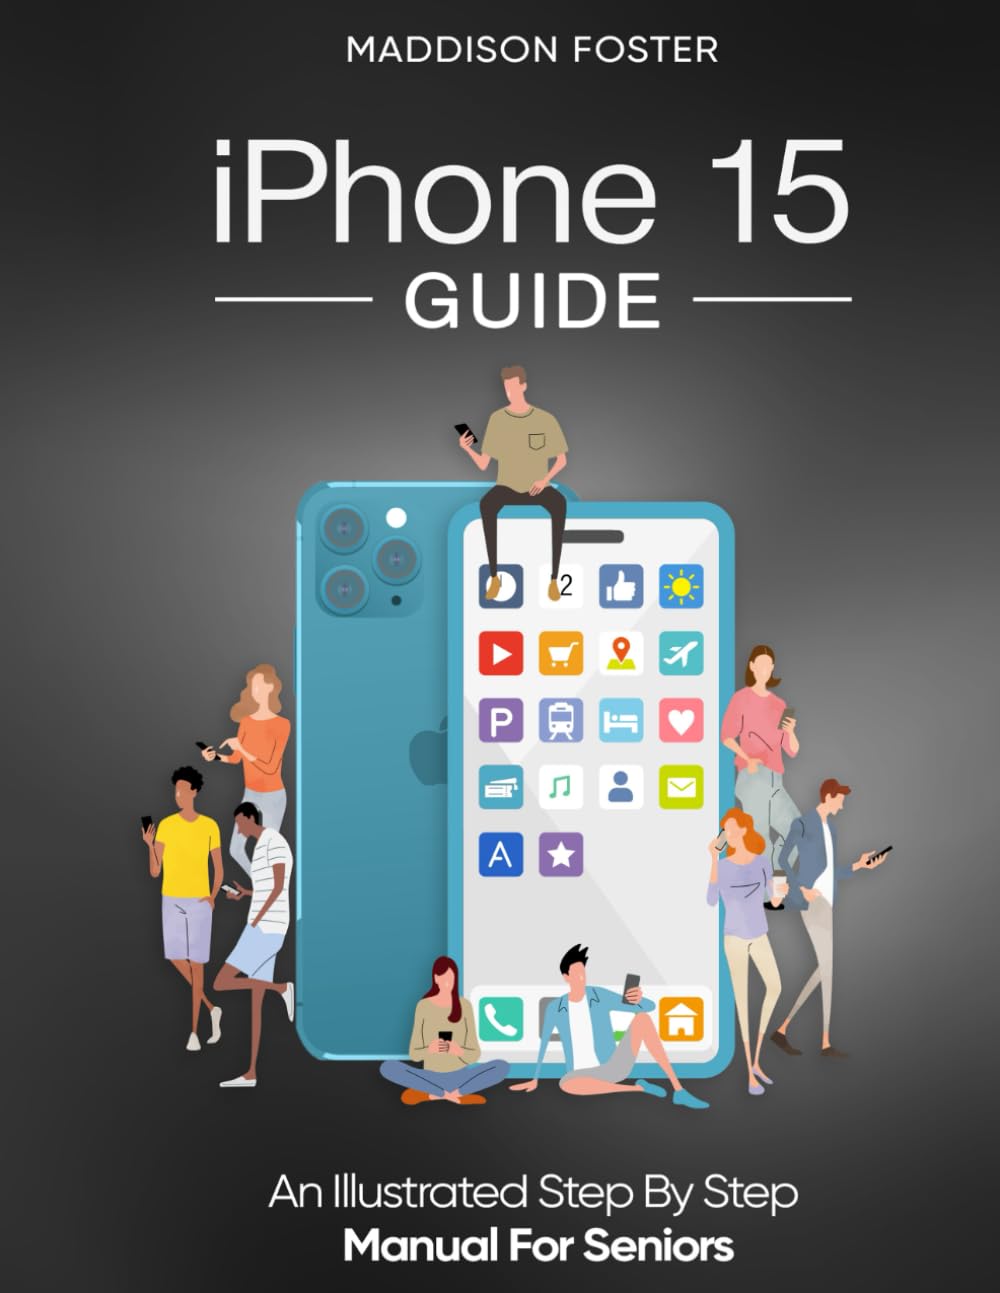 iPhone 15 Guide - An Illustrated Step by Step Manual for Seniors